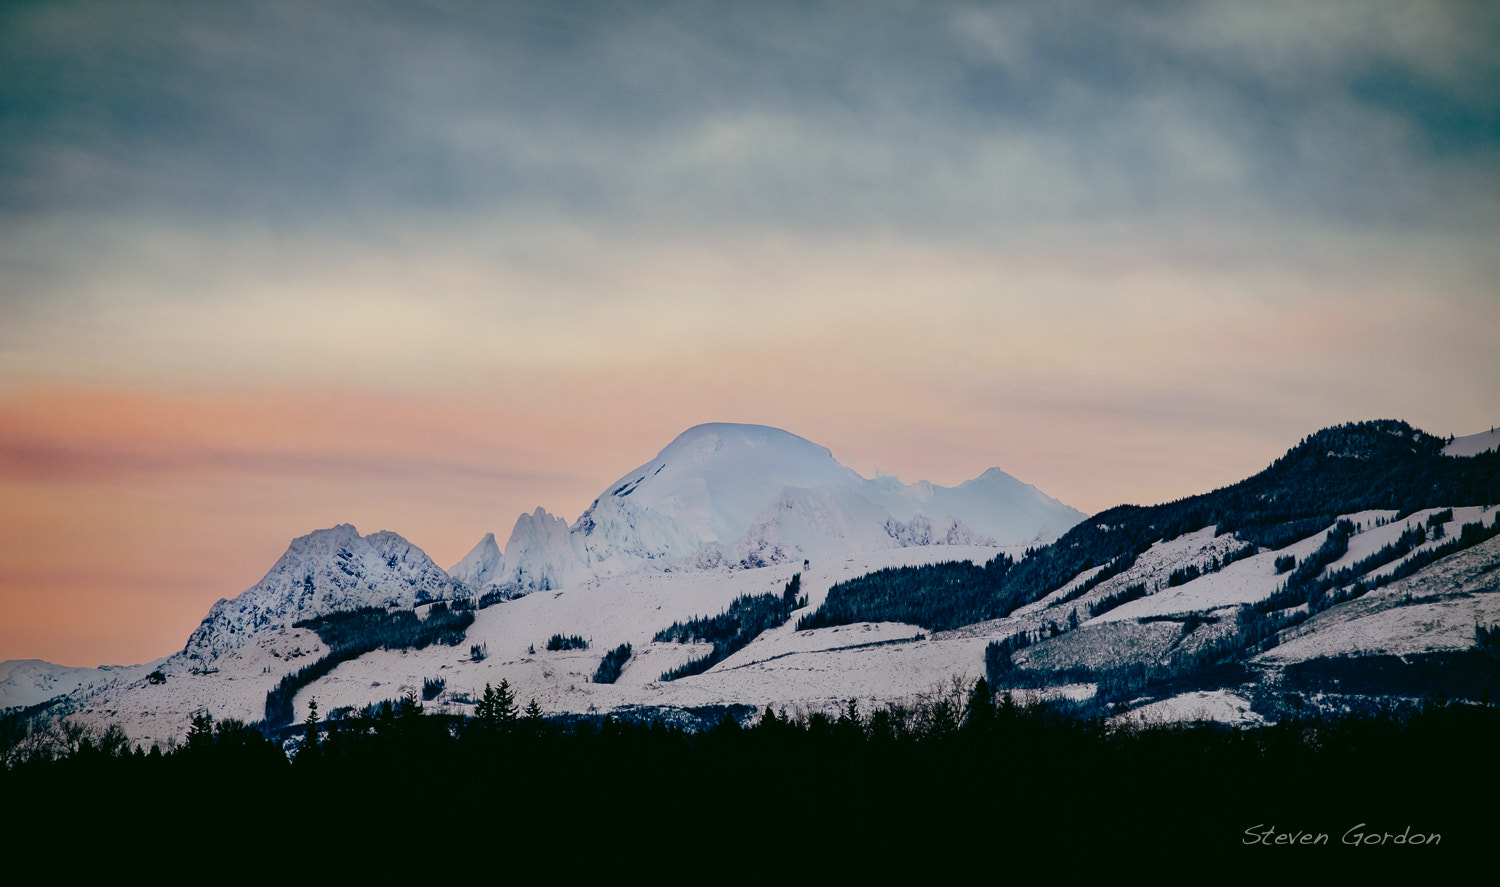 XF50-140mmF2.8 R LM OIS WR + 1.4x sample photo. Mt baker sunset glow photography